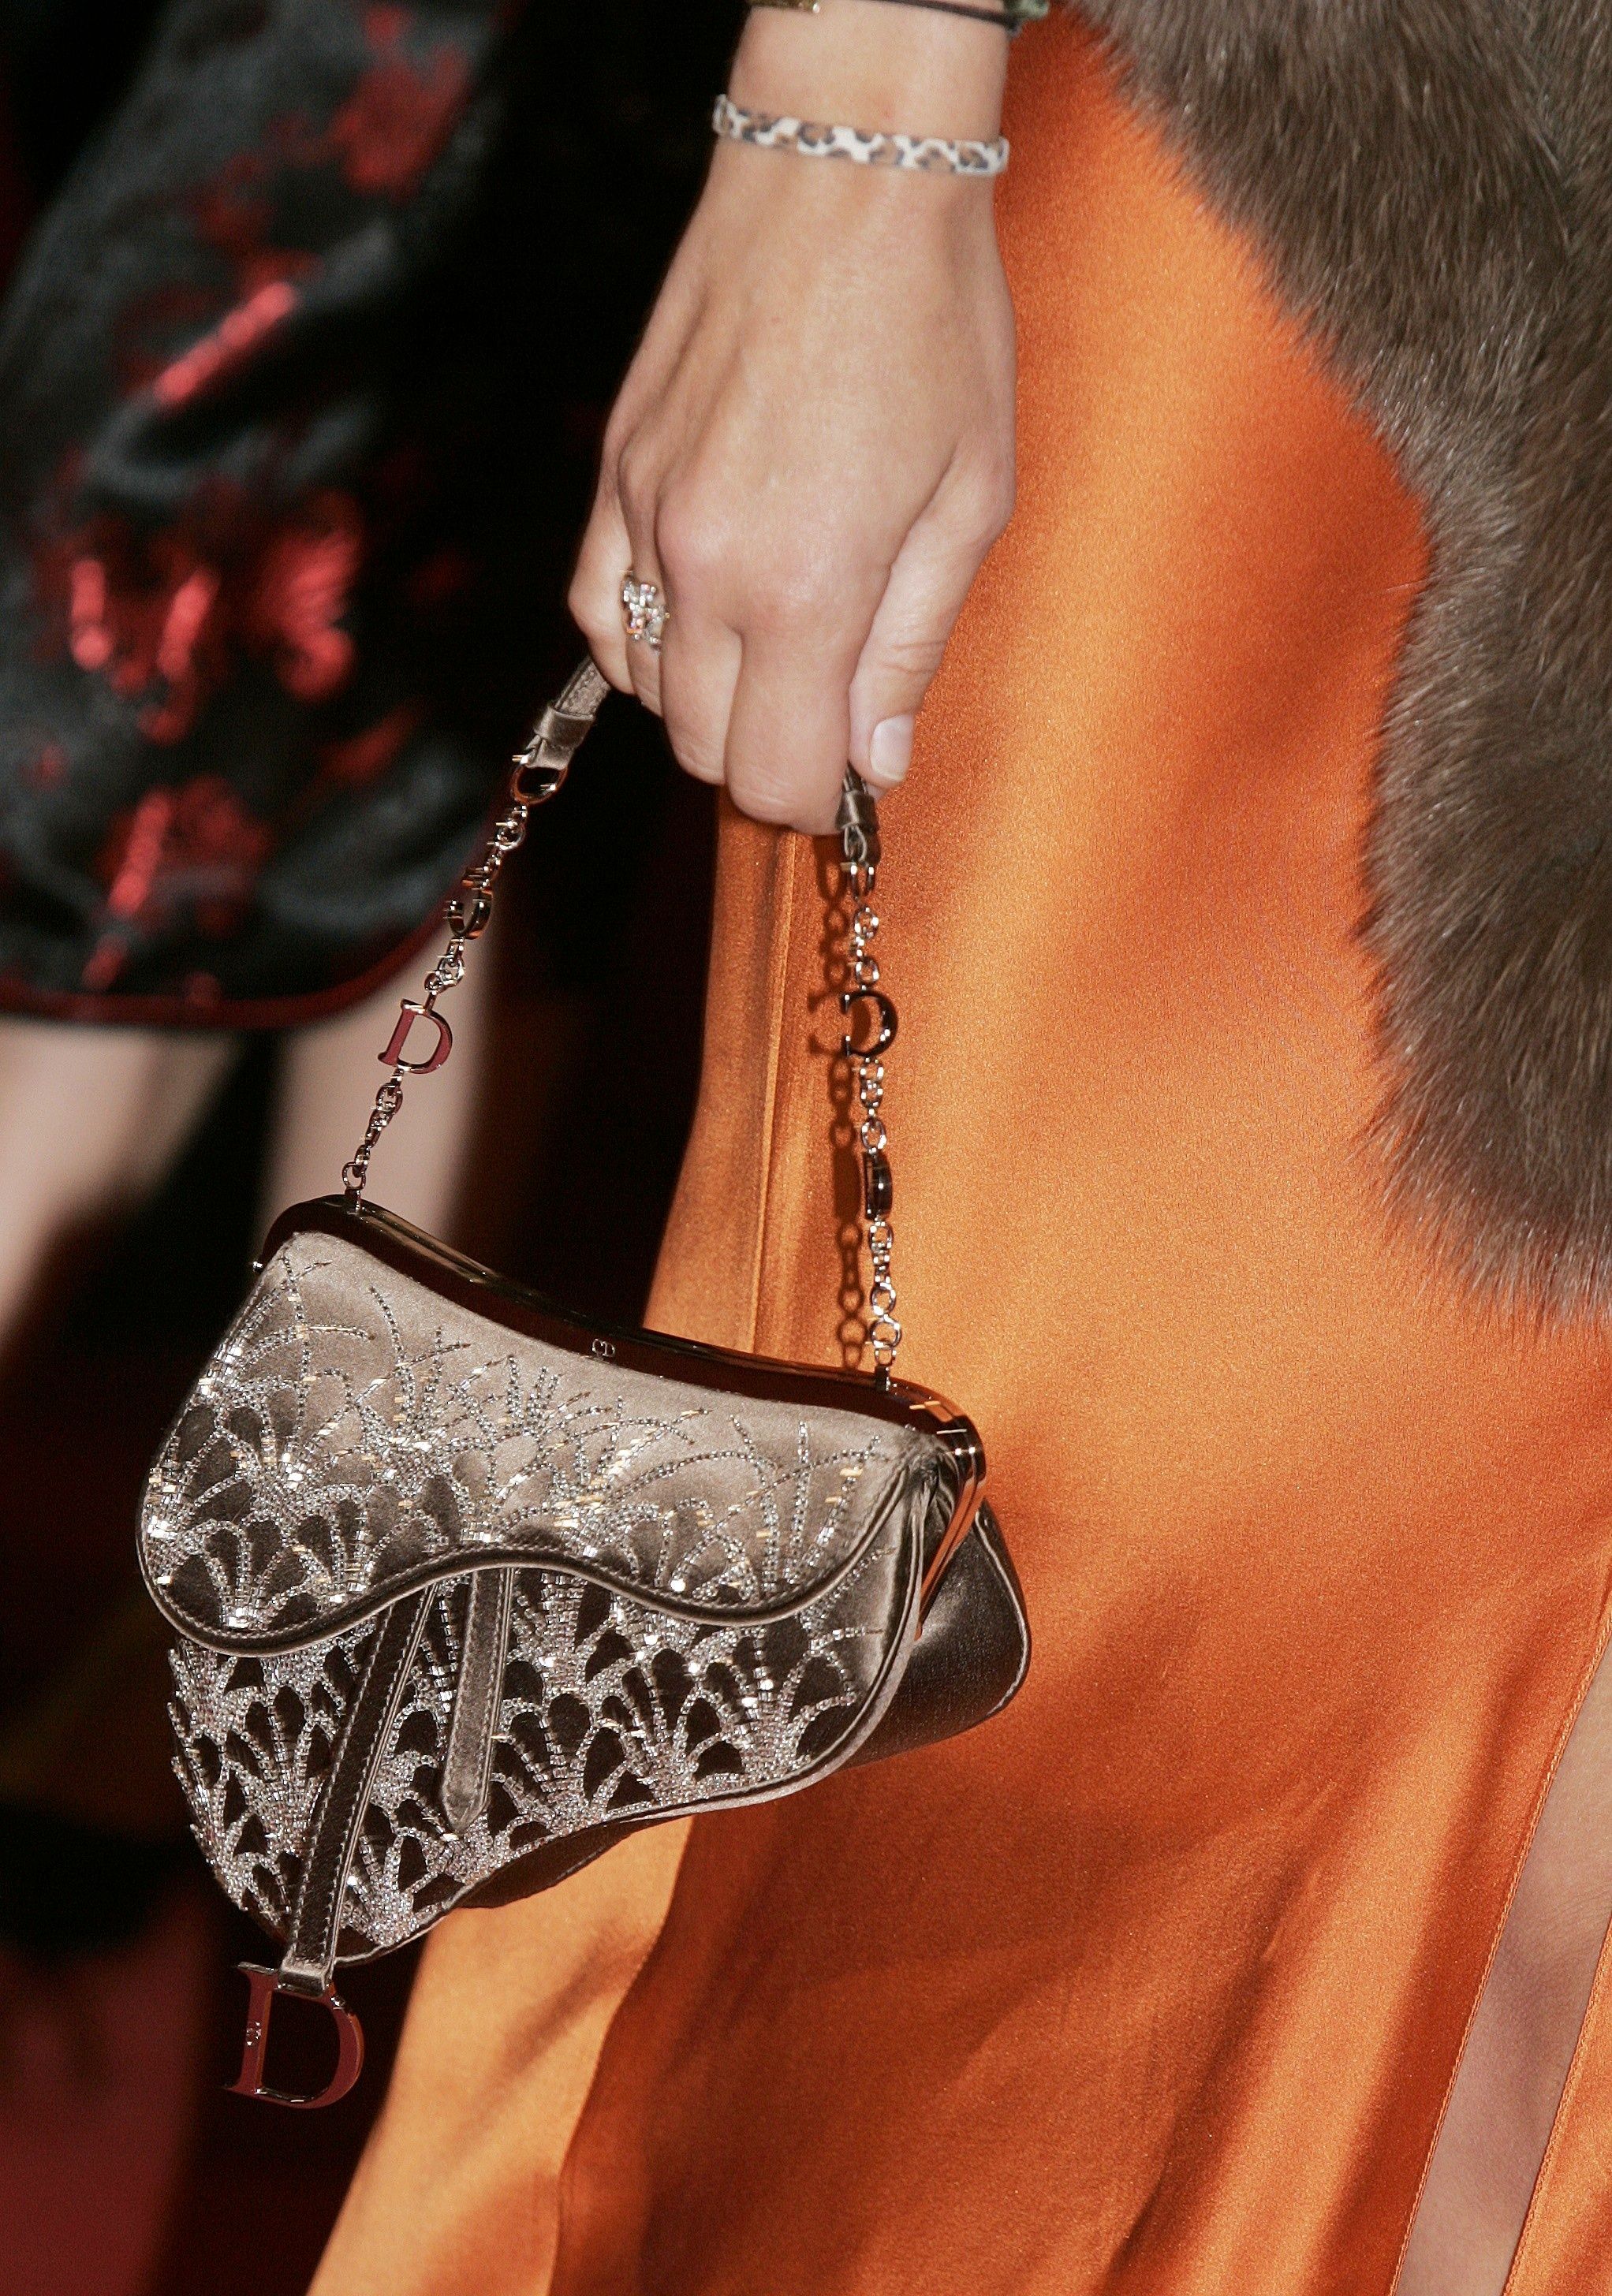 Why Your Handbag Collection Isn't Complete Without an Iconic